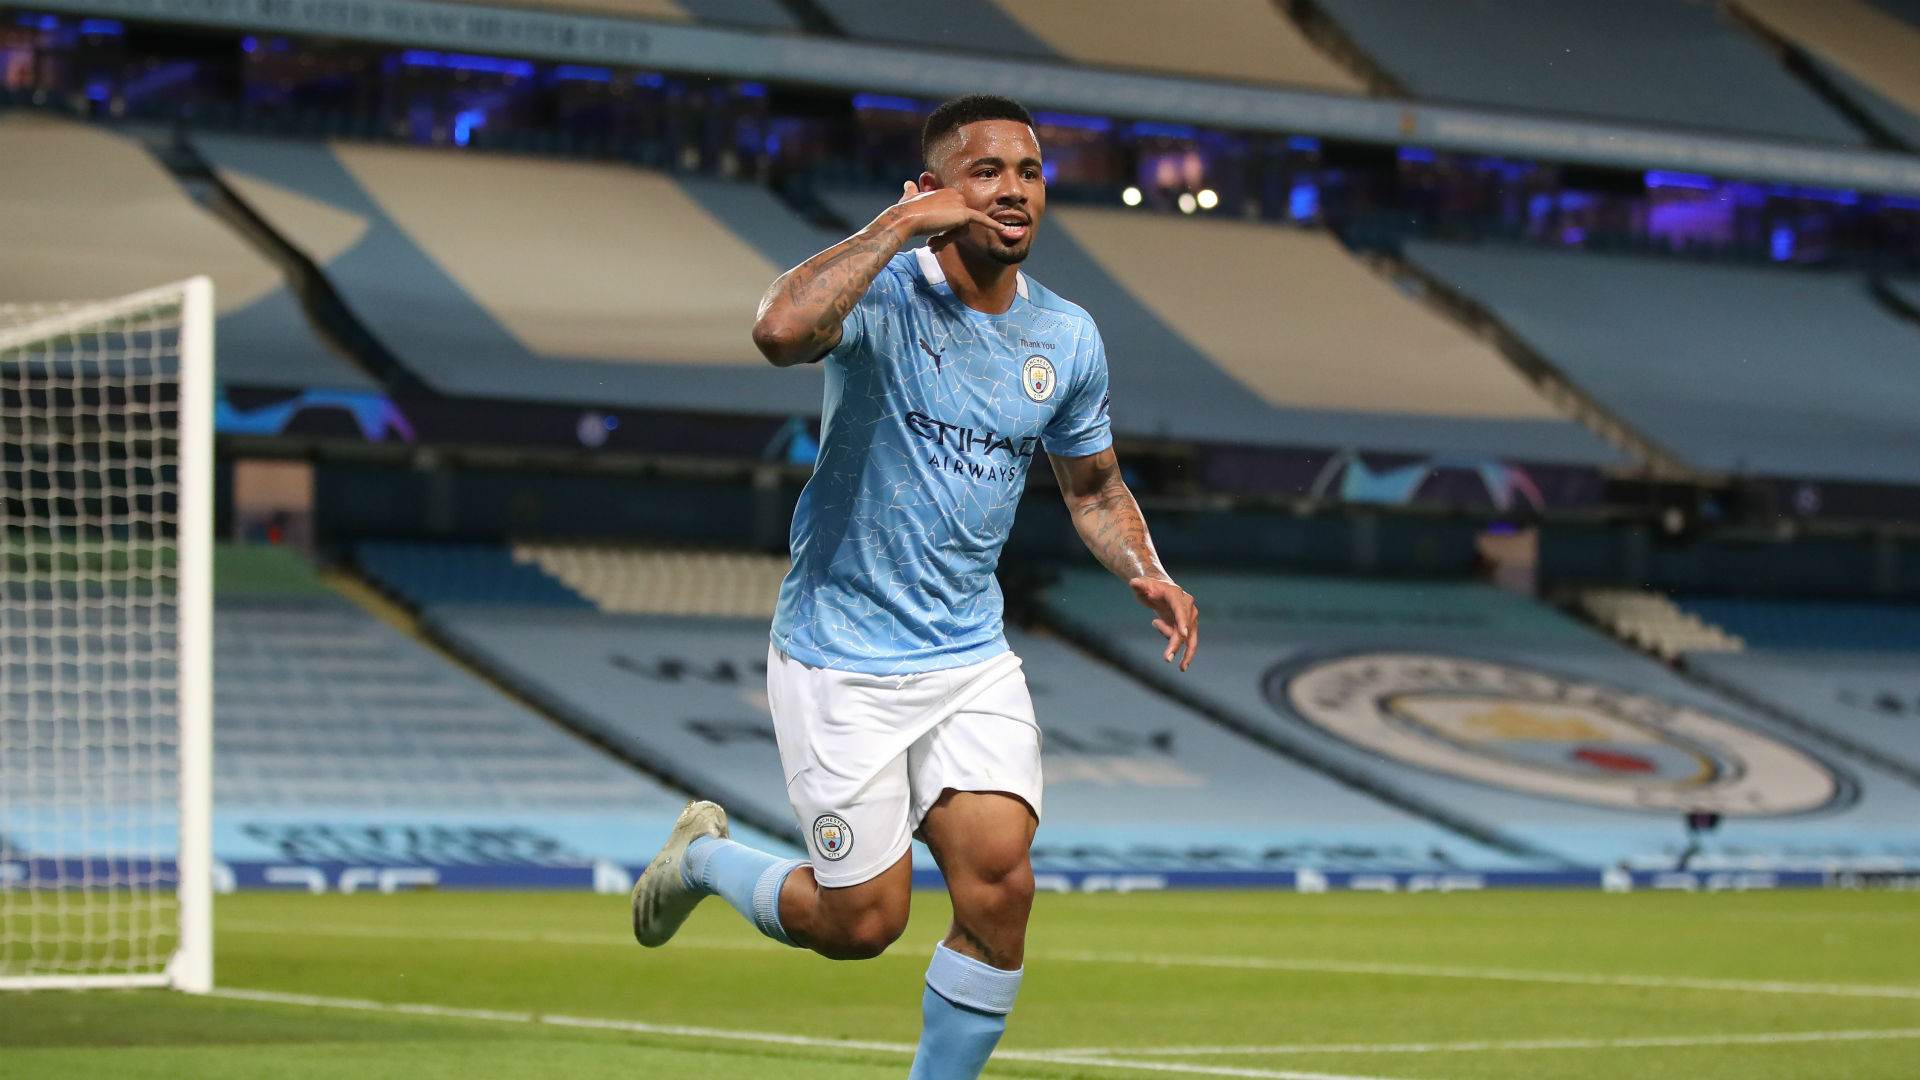 Gabriel Jesus worked tirelessly before firing Manchester City into the Champions League last eight and he wants to measure up to the greats.